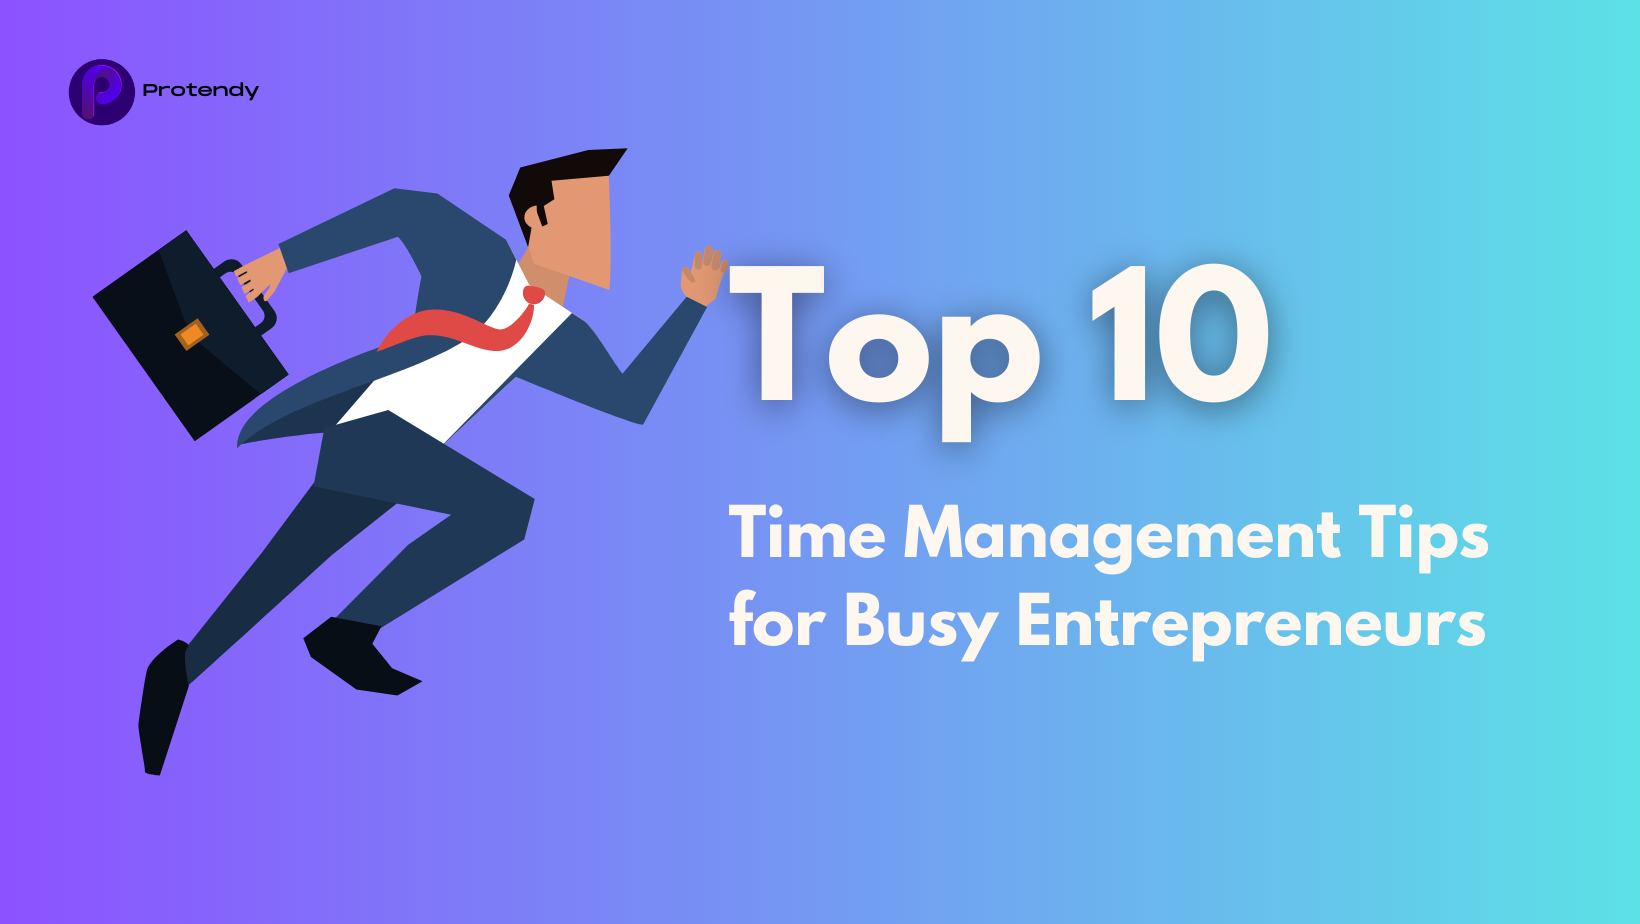 Top-10-Time-Management-Tips-For-Busy-Entrepreneurs-Blog-By-Protendy